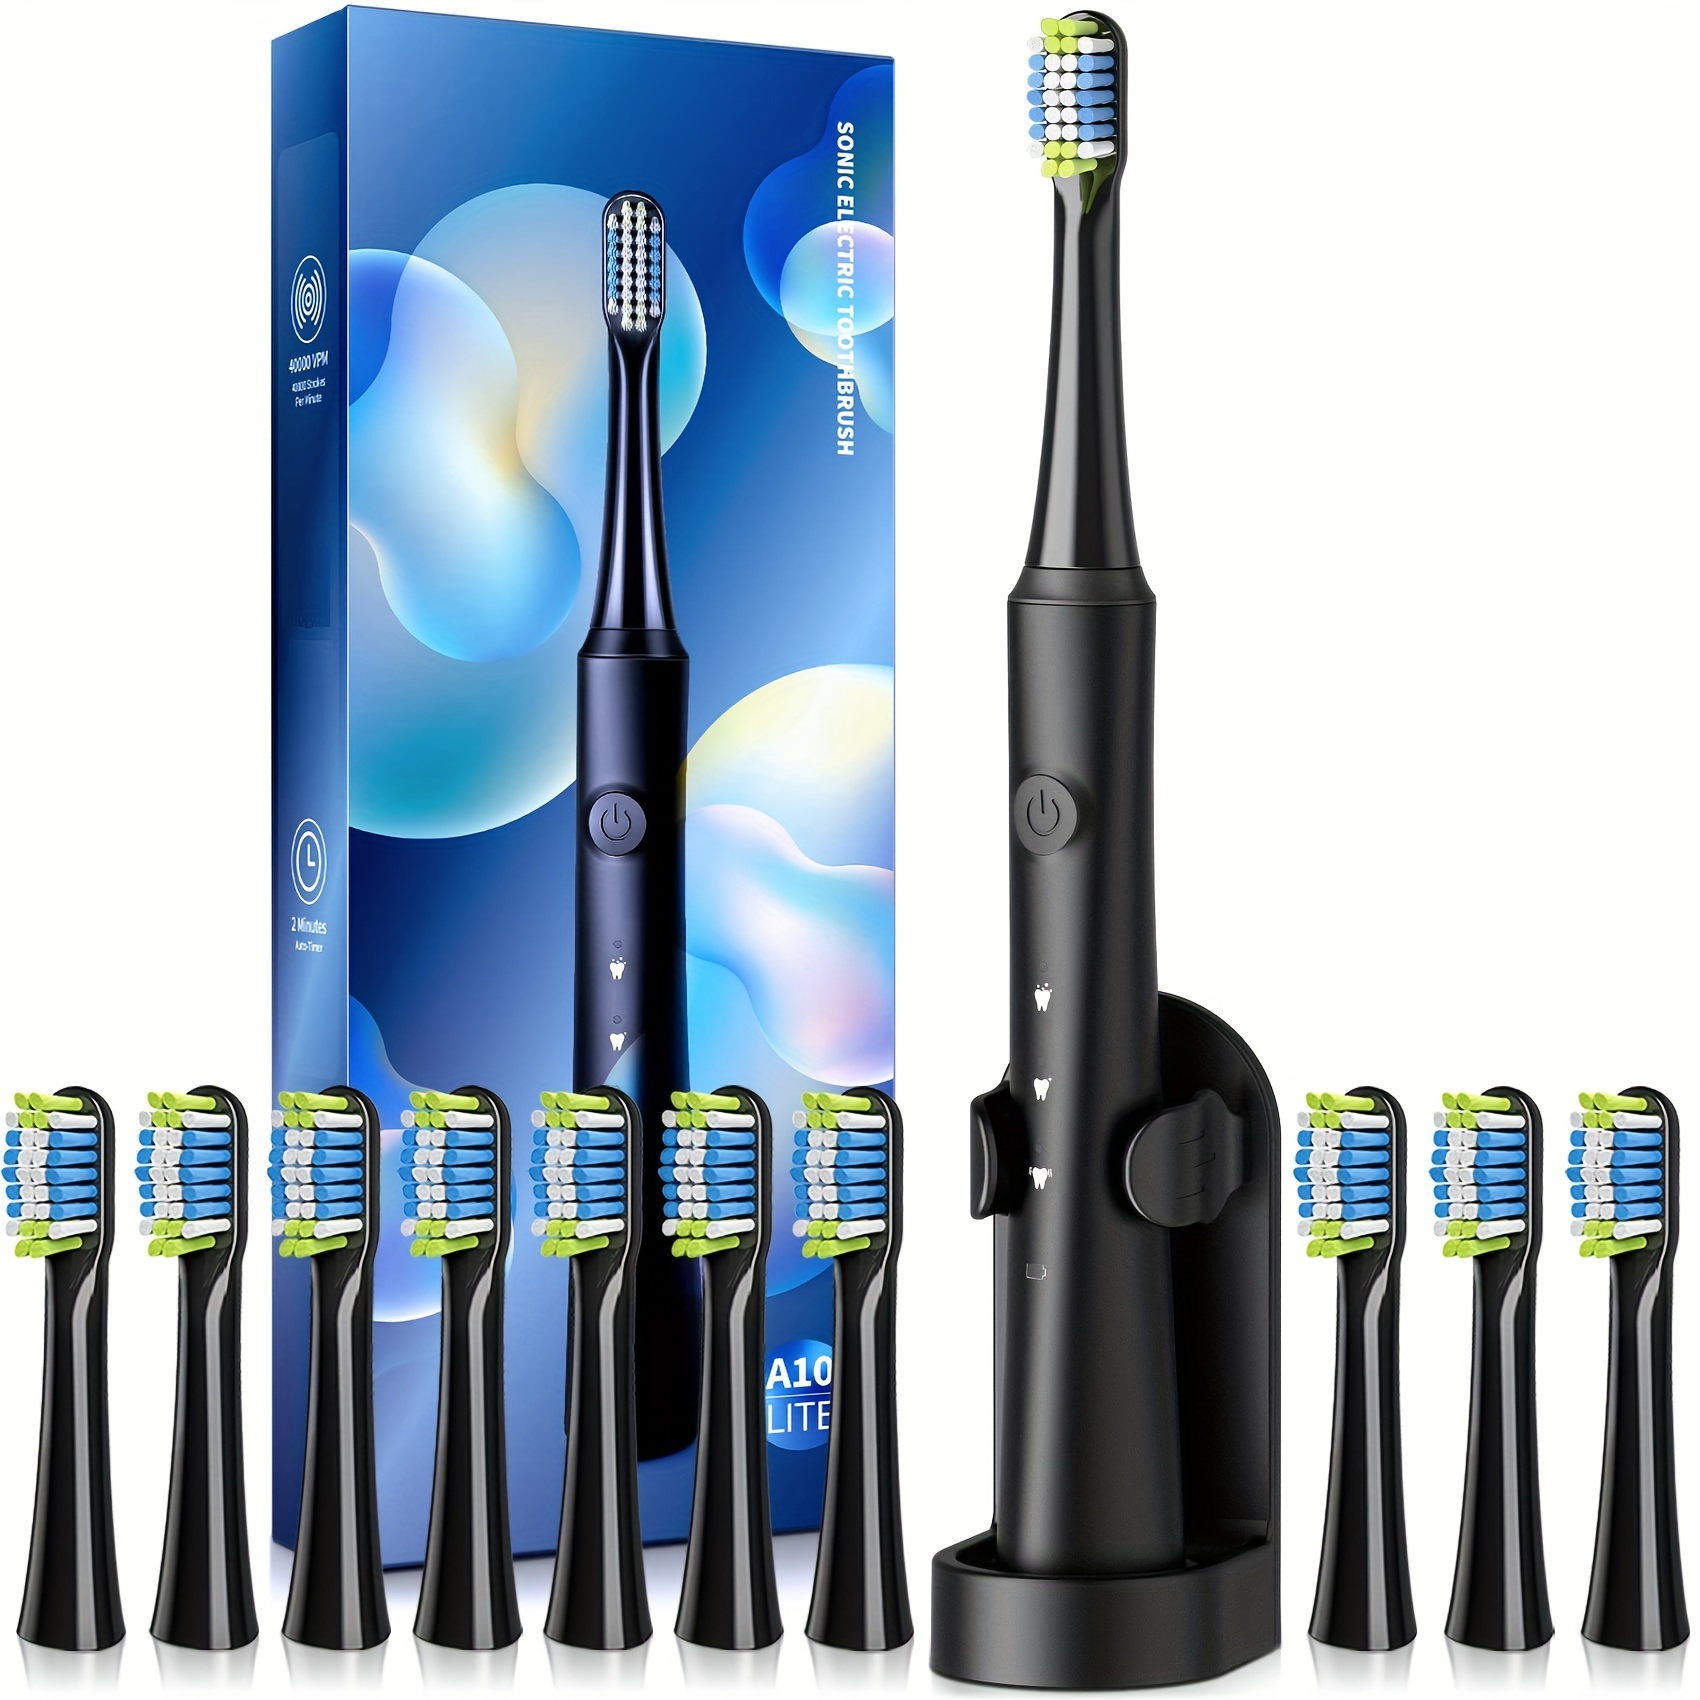 

Electric Toothbrush For Adults With Holder And 10 Brush Heads, Rechargeabletoothbrush With 40000 Vpm Deep Cleanelectric Fast 2 Hr Charge Last 35 Days, And 3 Modes